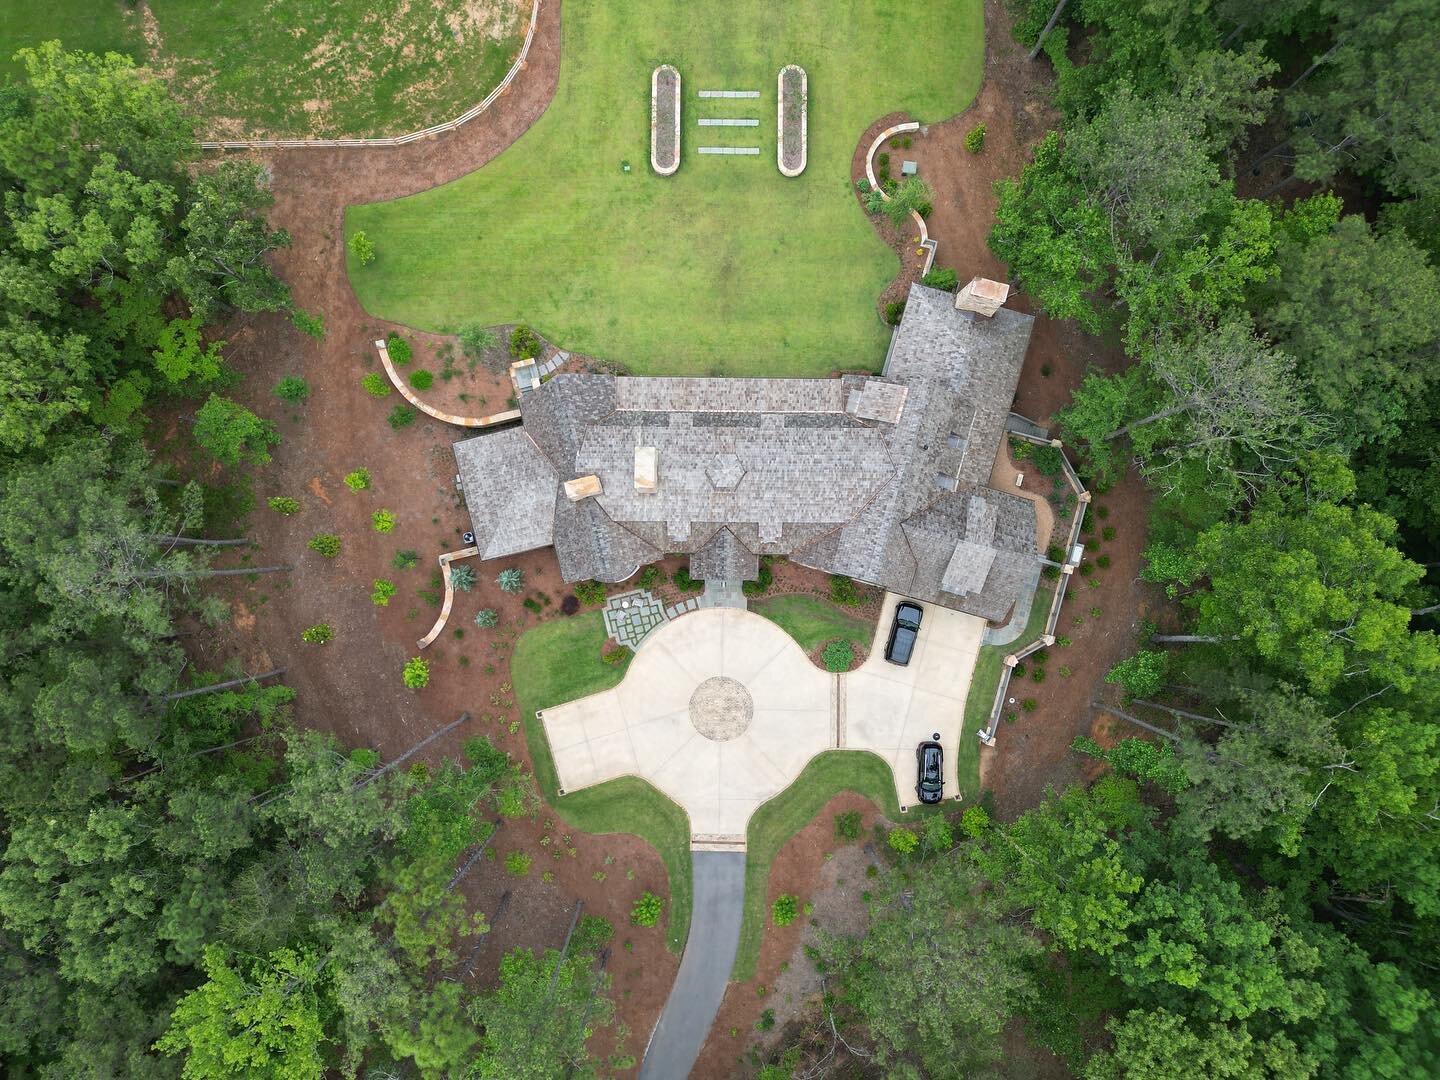 Photoshoot week at a favorite project for such an incredible family 
.
.
.
#architect #architecture #architecturephotography #landscapephotography #landscape #farm #horsefarm #farmlife #aerialphotography #carlislemoorearchitects